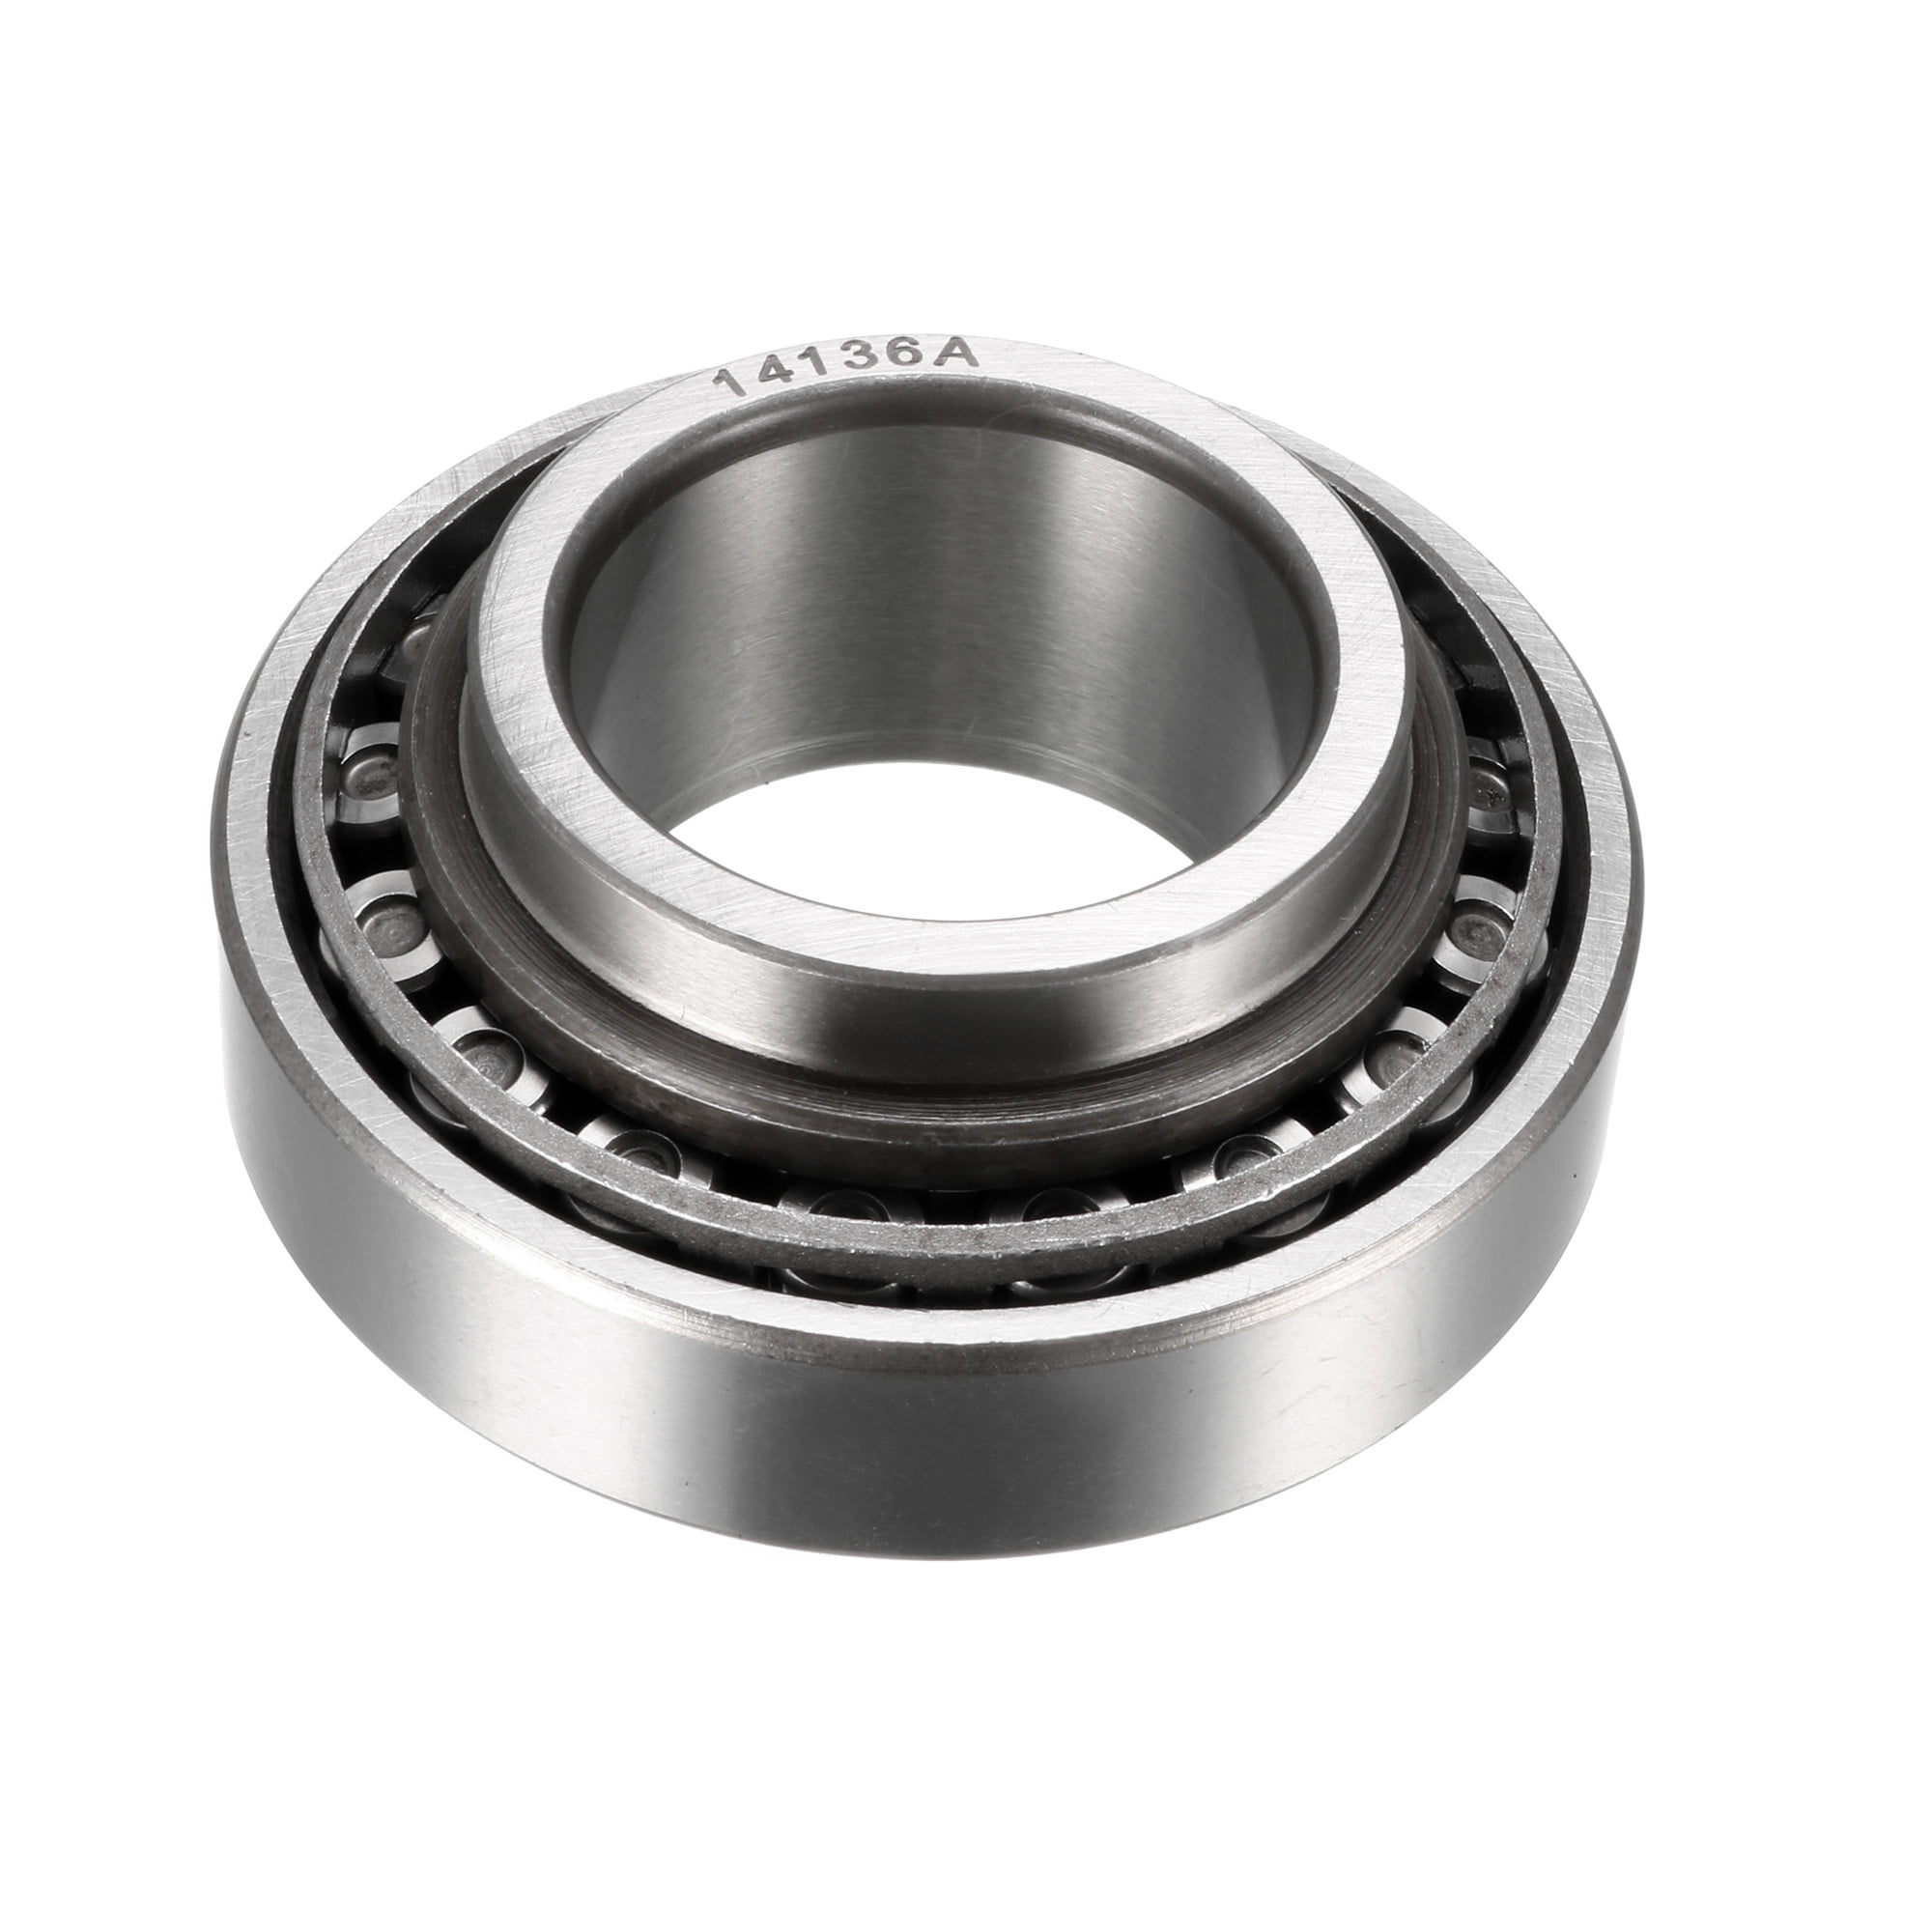 2x 14136a-14276 Tapered Roller Bearing QJZ Premium Cup & Cone for sale online 